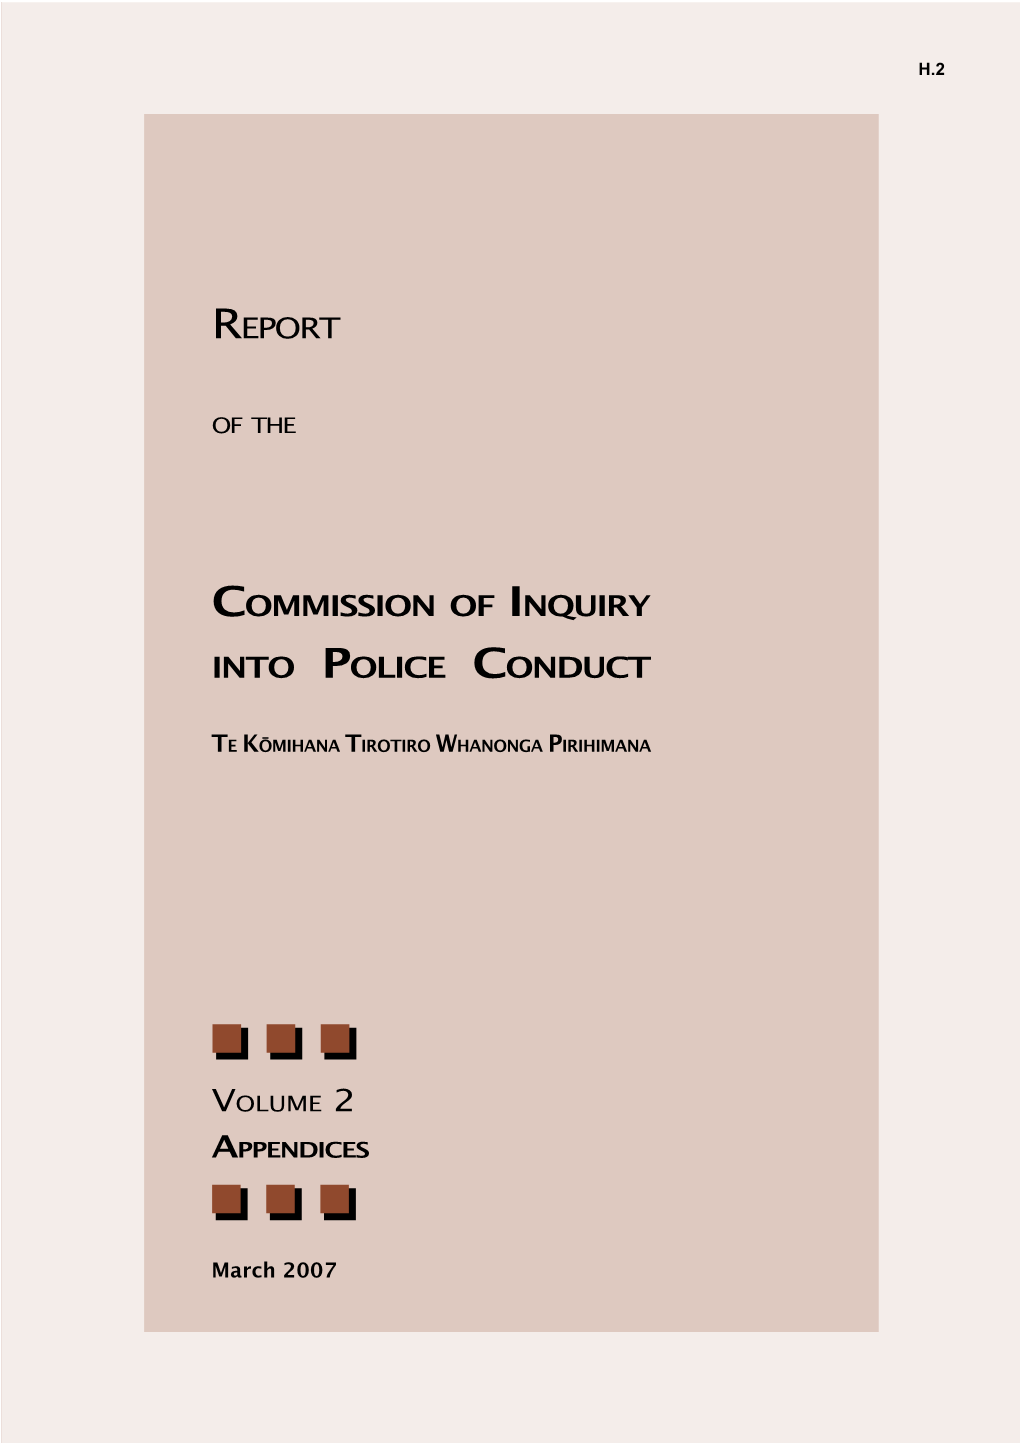 Commission of Inquiry Into Police Conduct